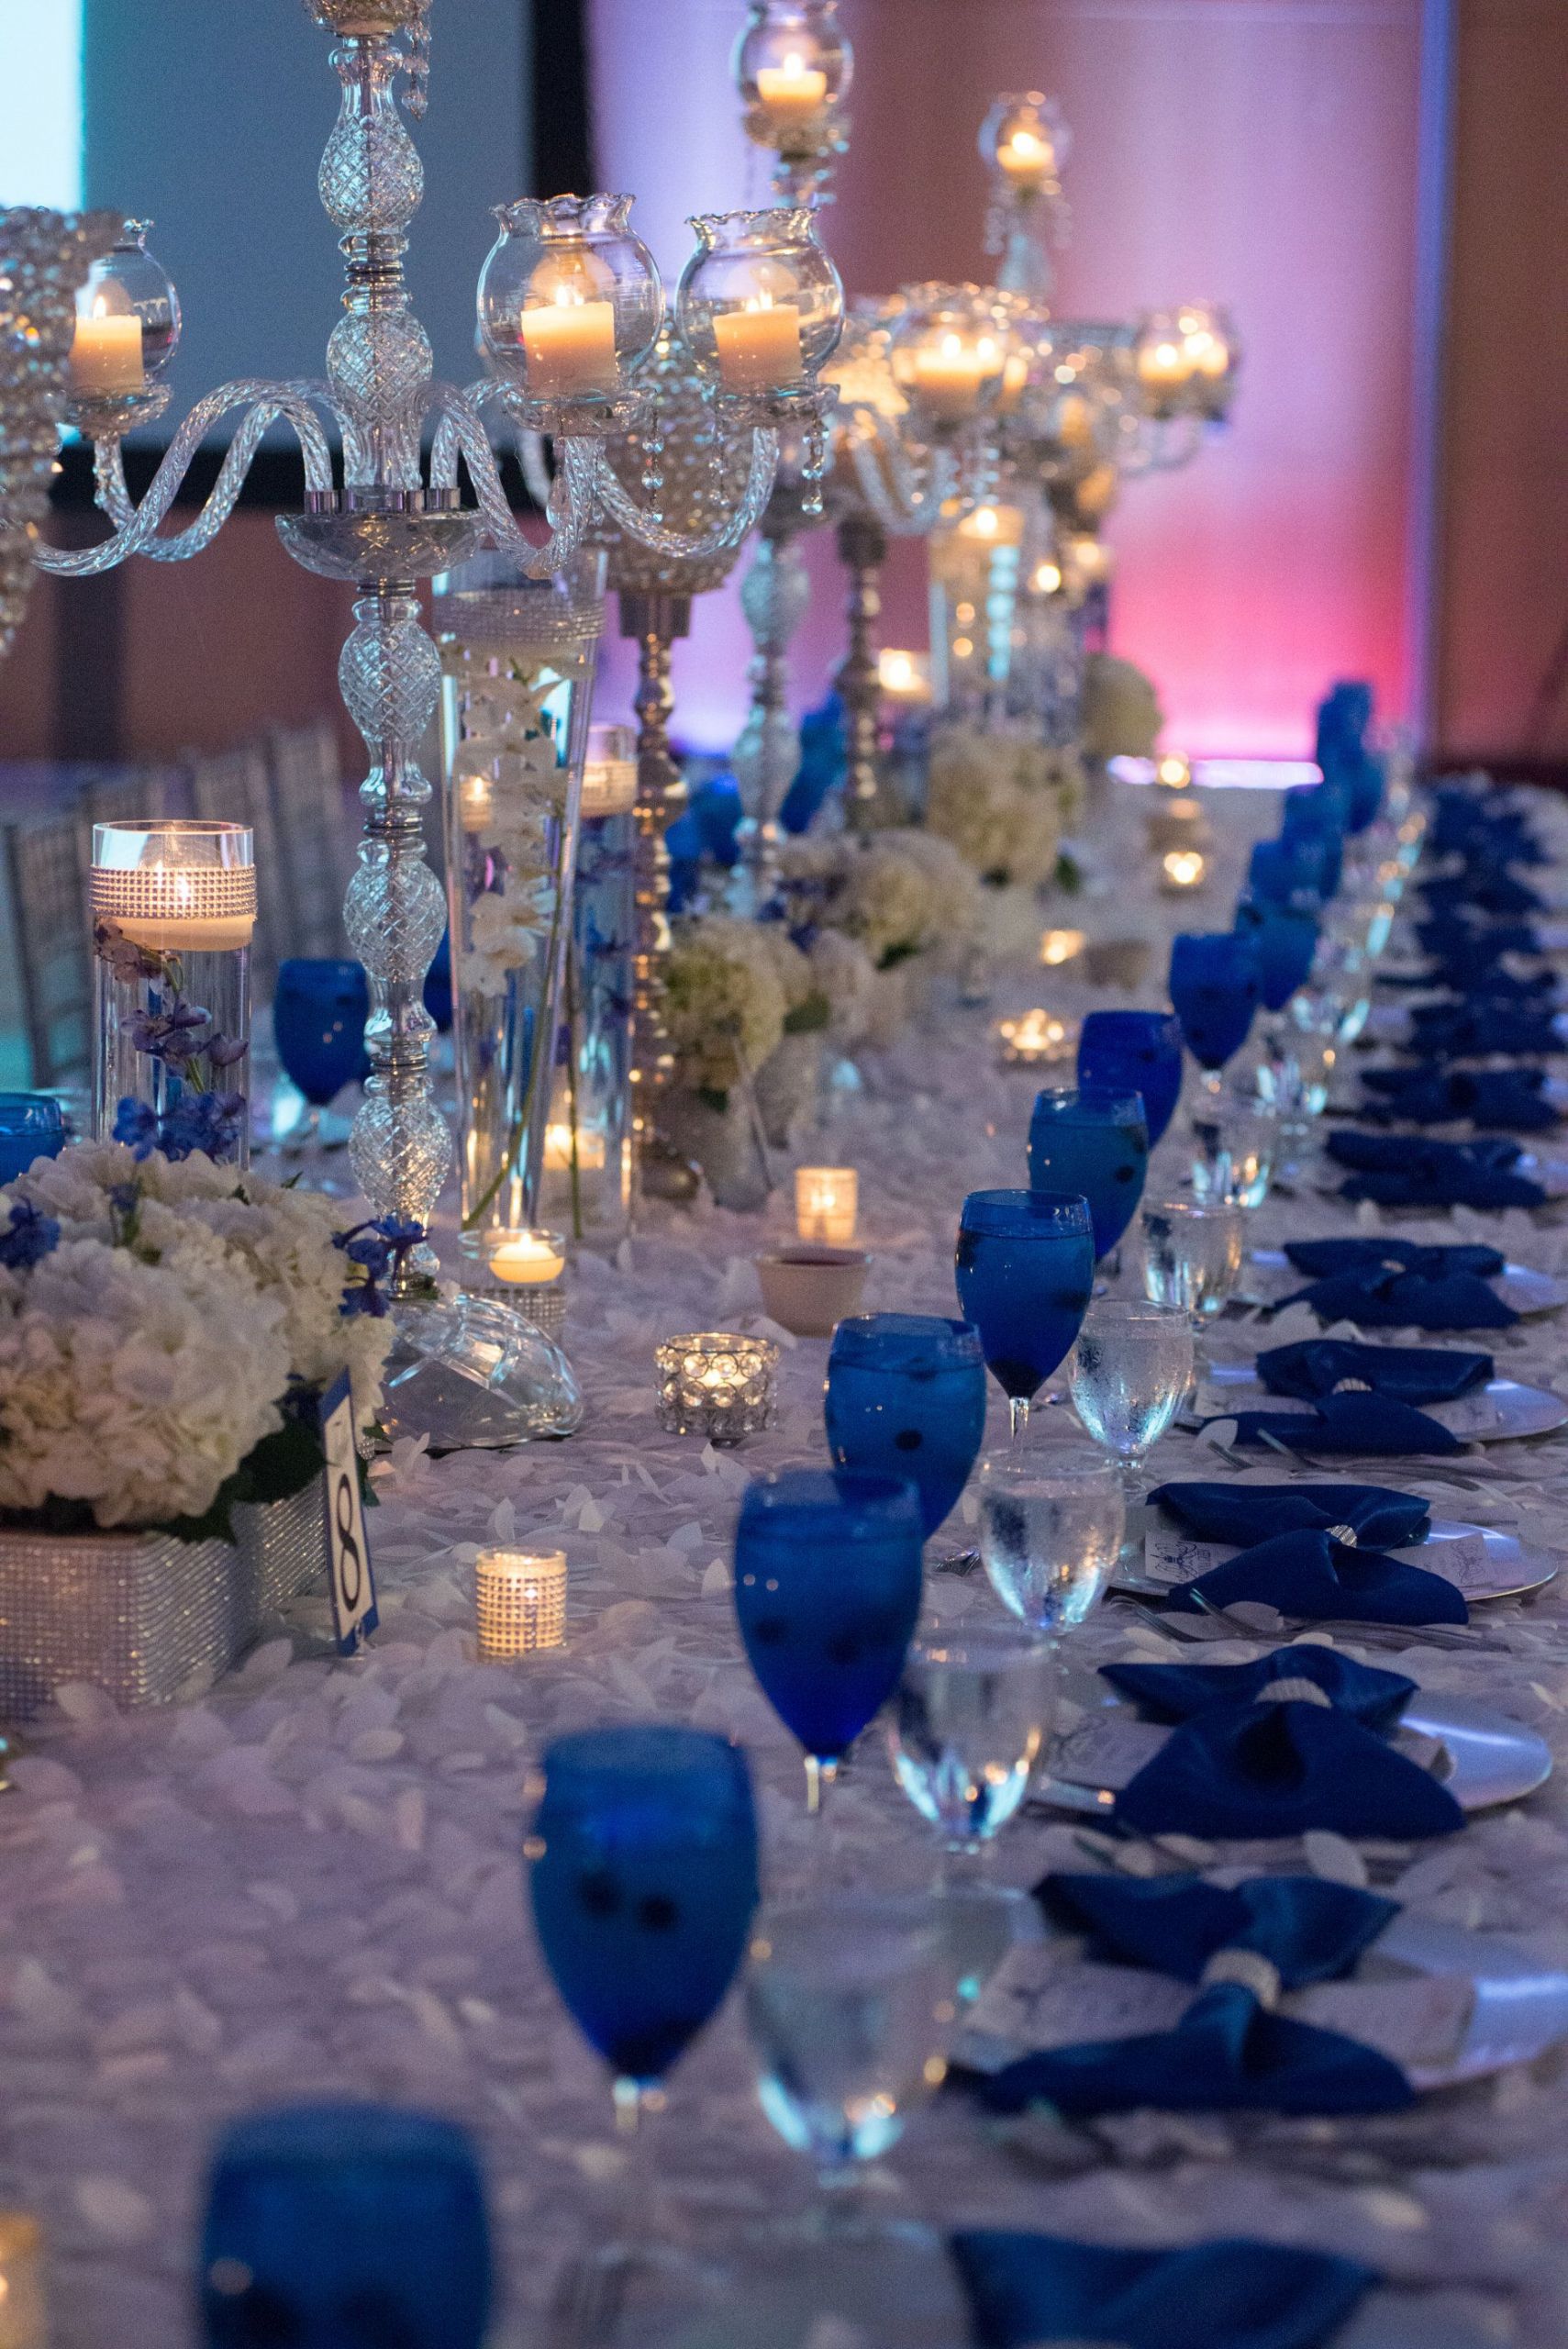 Blue Wedding Decor
 Our Royal Blue Wedding Family Styled Seating Reception